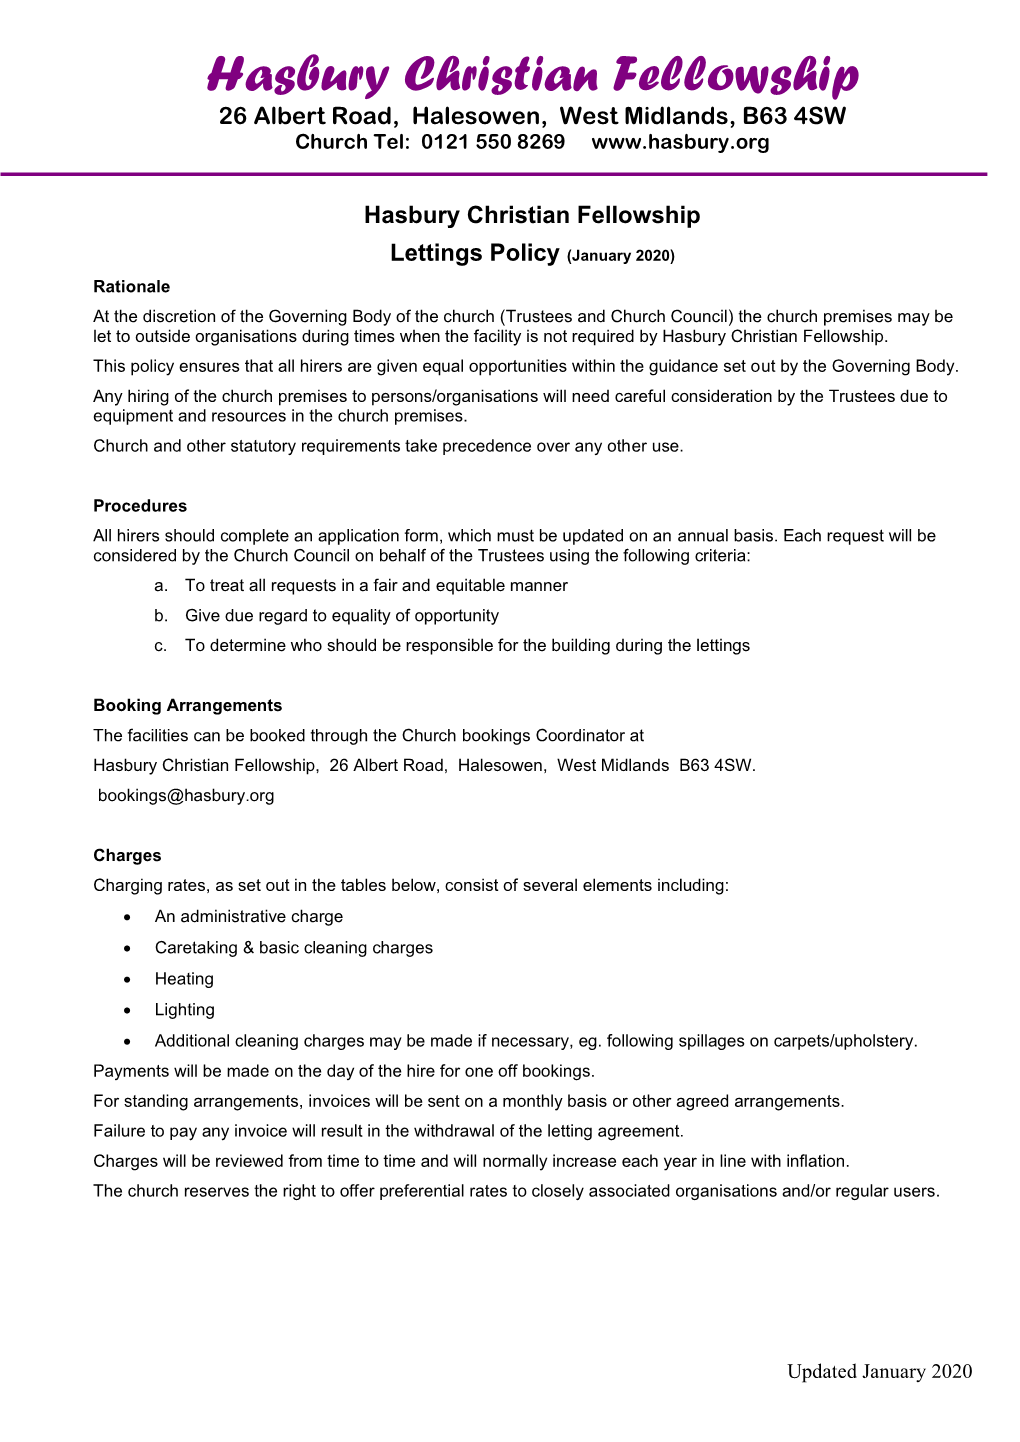 Lettings Policy Jan 2020